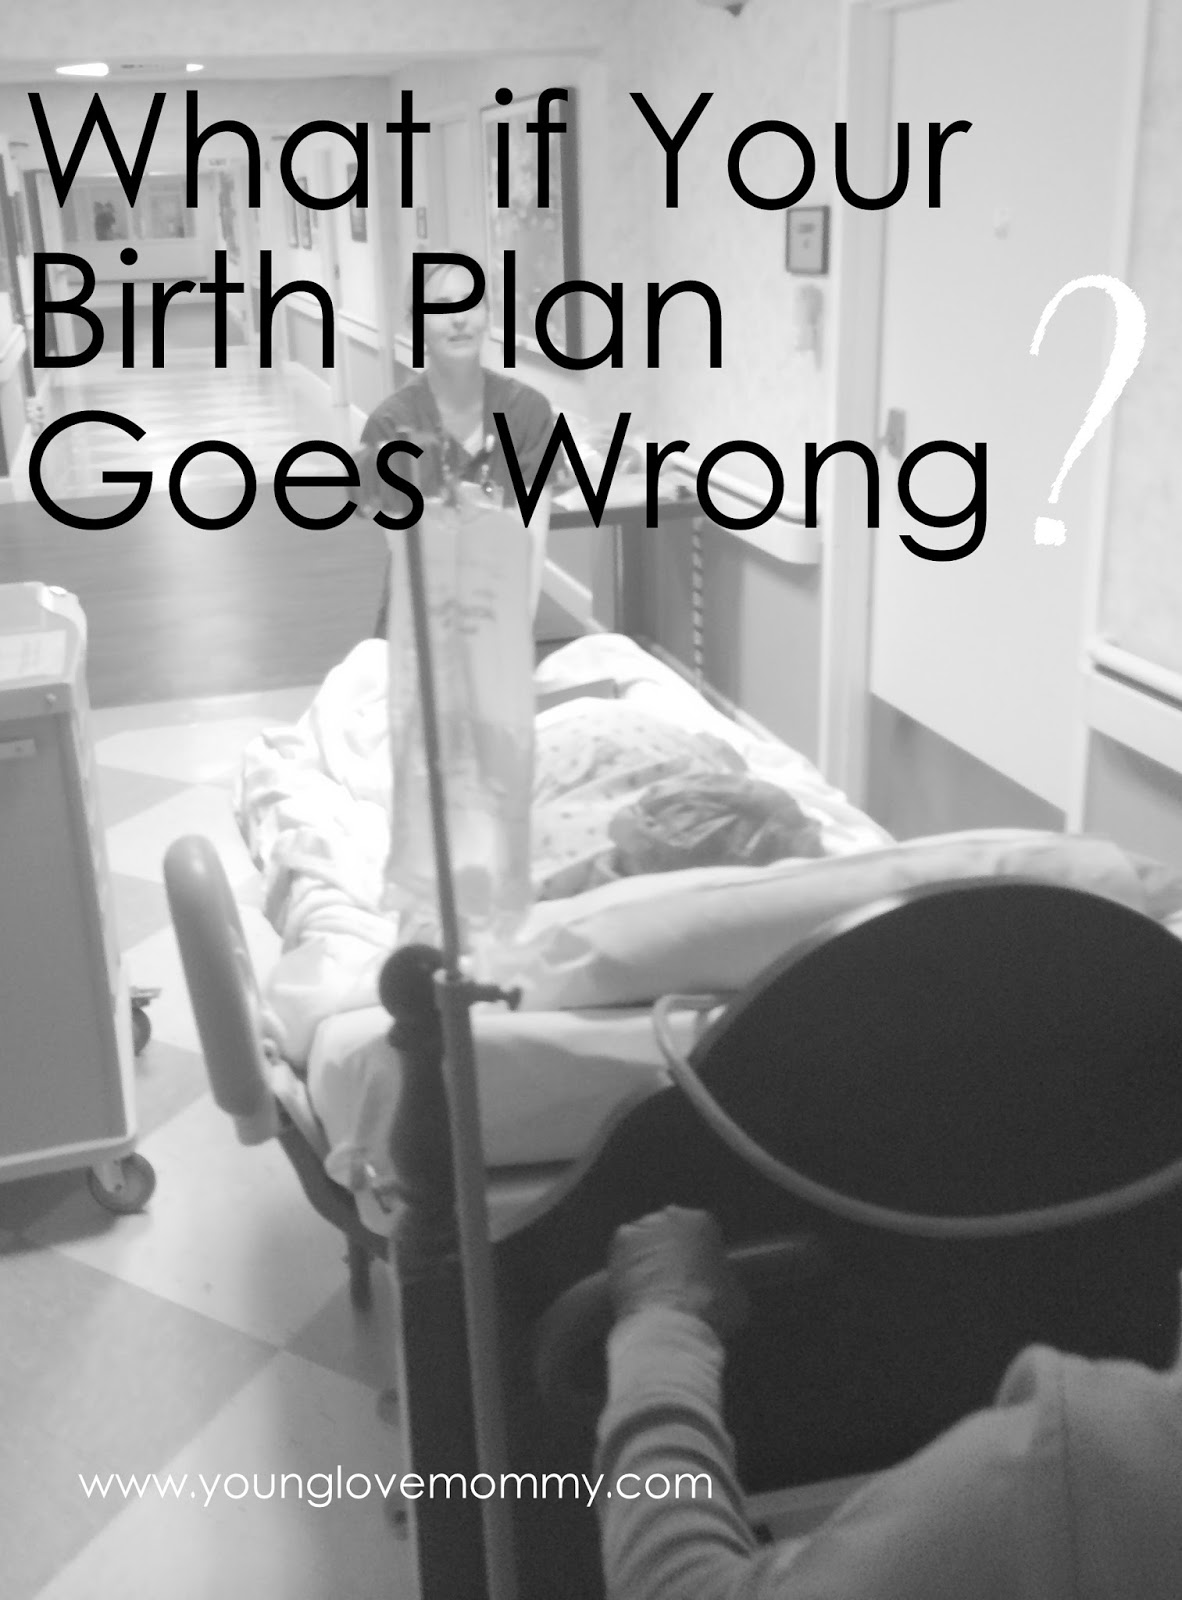 When your birth plan goes wrong